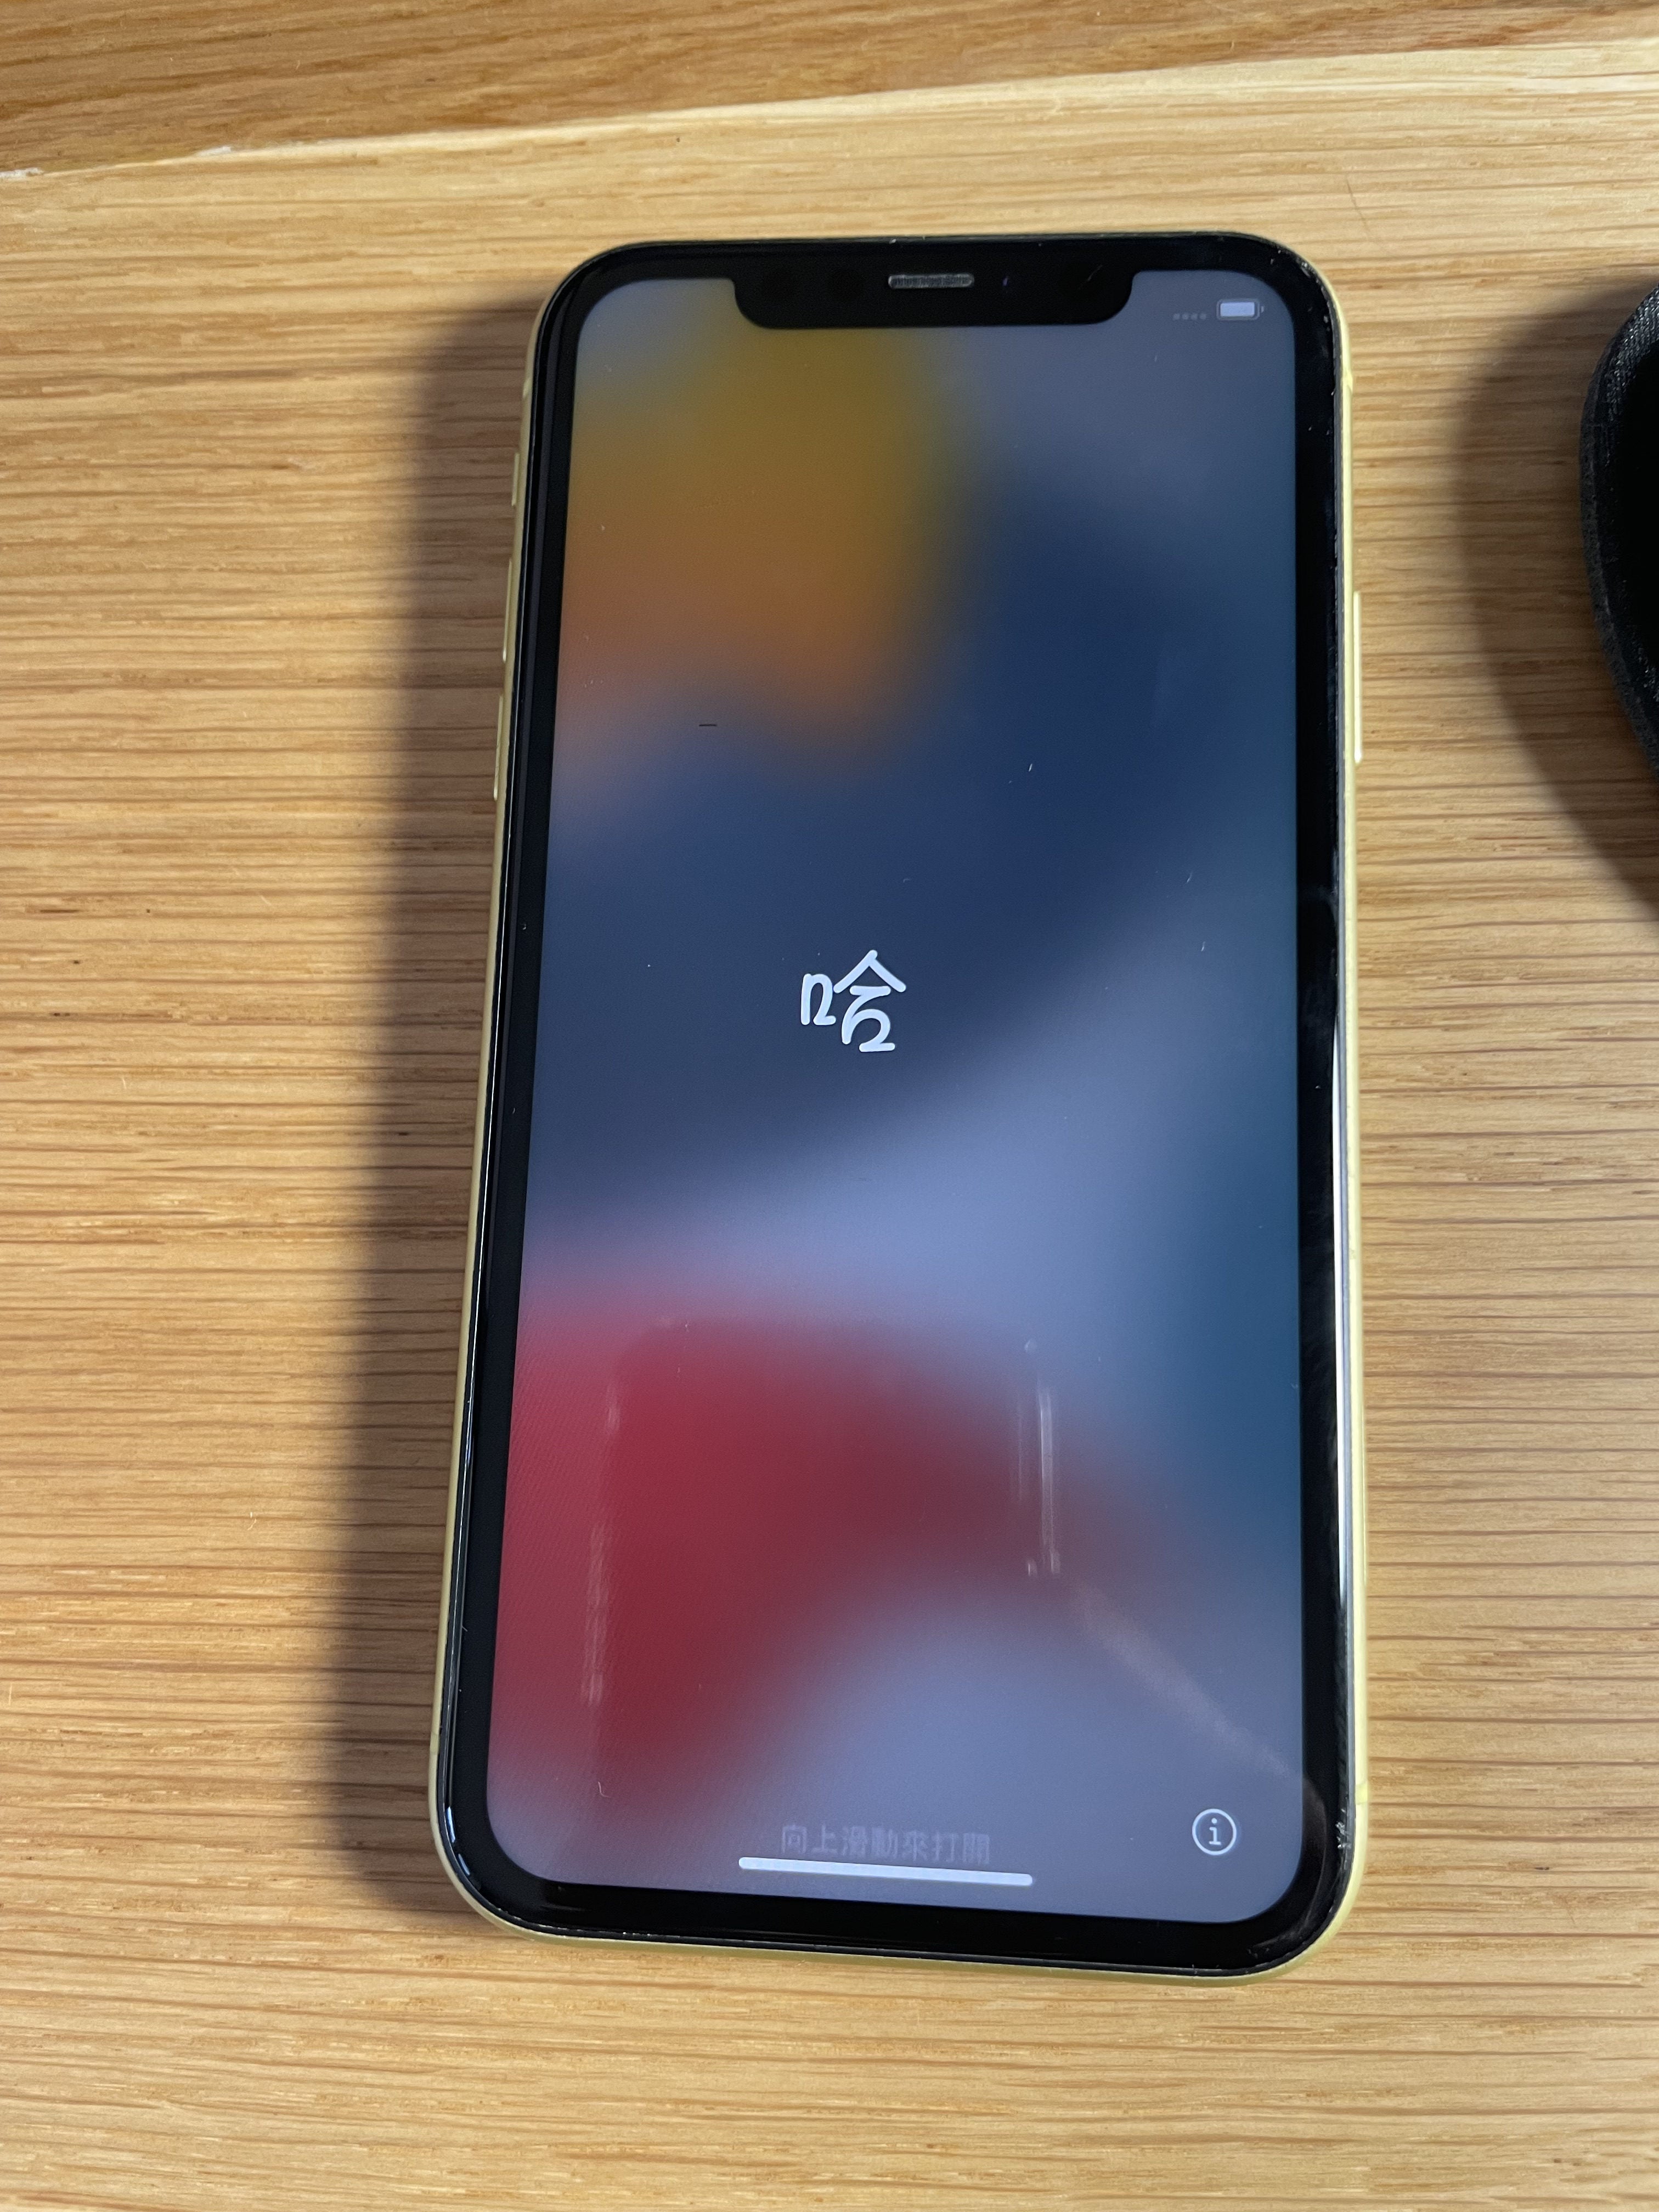 iPhone 11 yellow 64 GB $425 for sale - RedFlagDeals.com Forums